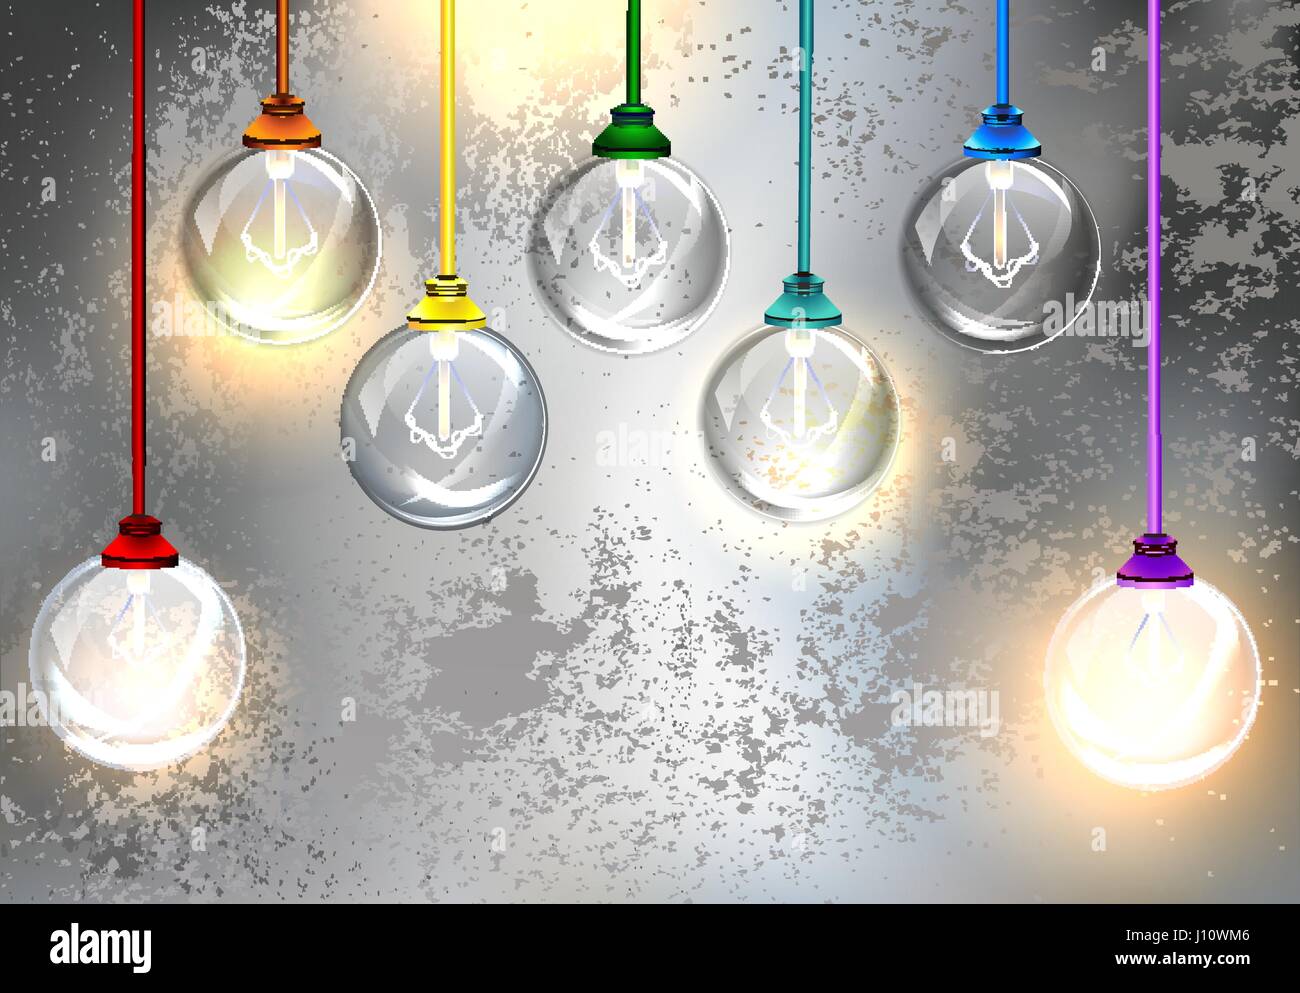 Seven round, glass bulbs with multi-colored cable on a gray, textured background. Industrial style. Stock Vector